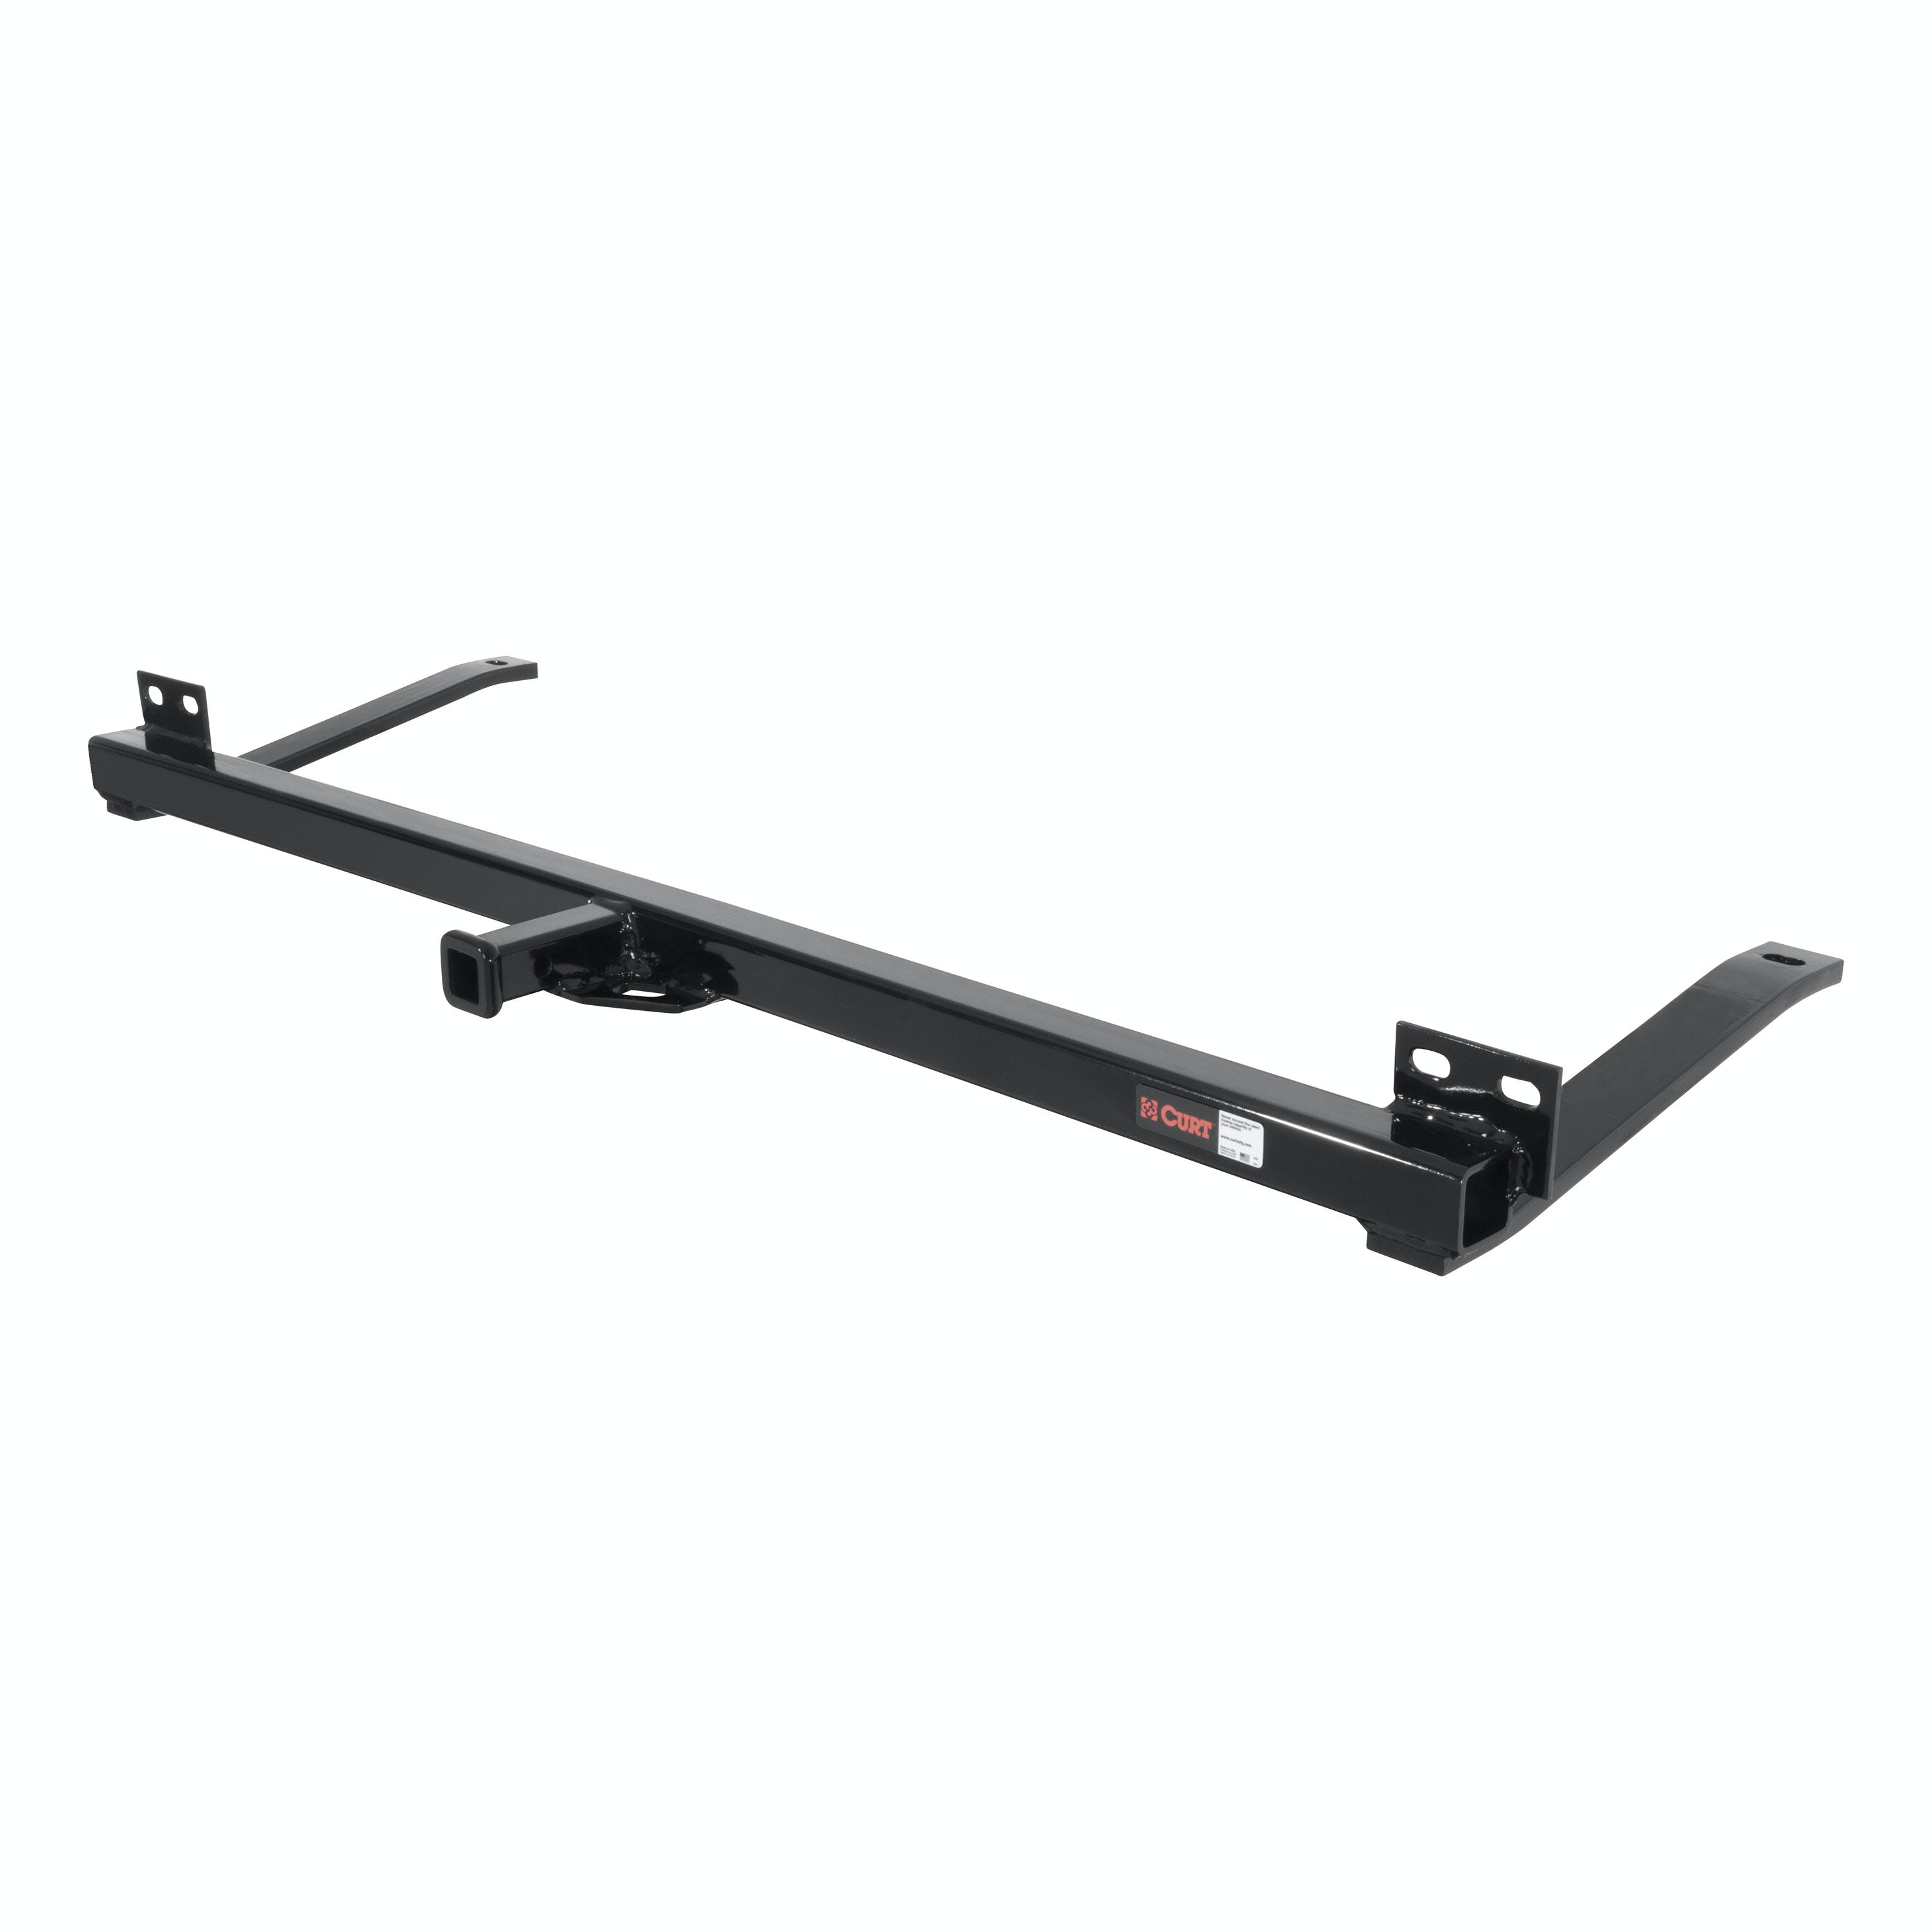 CURT 12005 Class 2 Hitch, 1-1/4, Select Buick, Chevrolet, Oldsmobile, Pontiac Vehicles